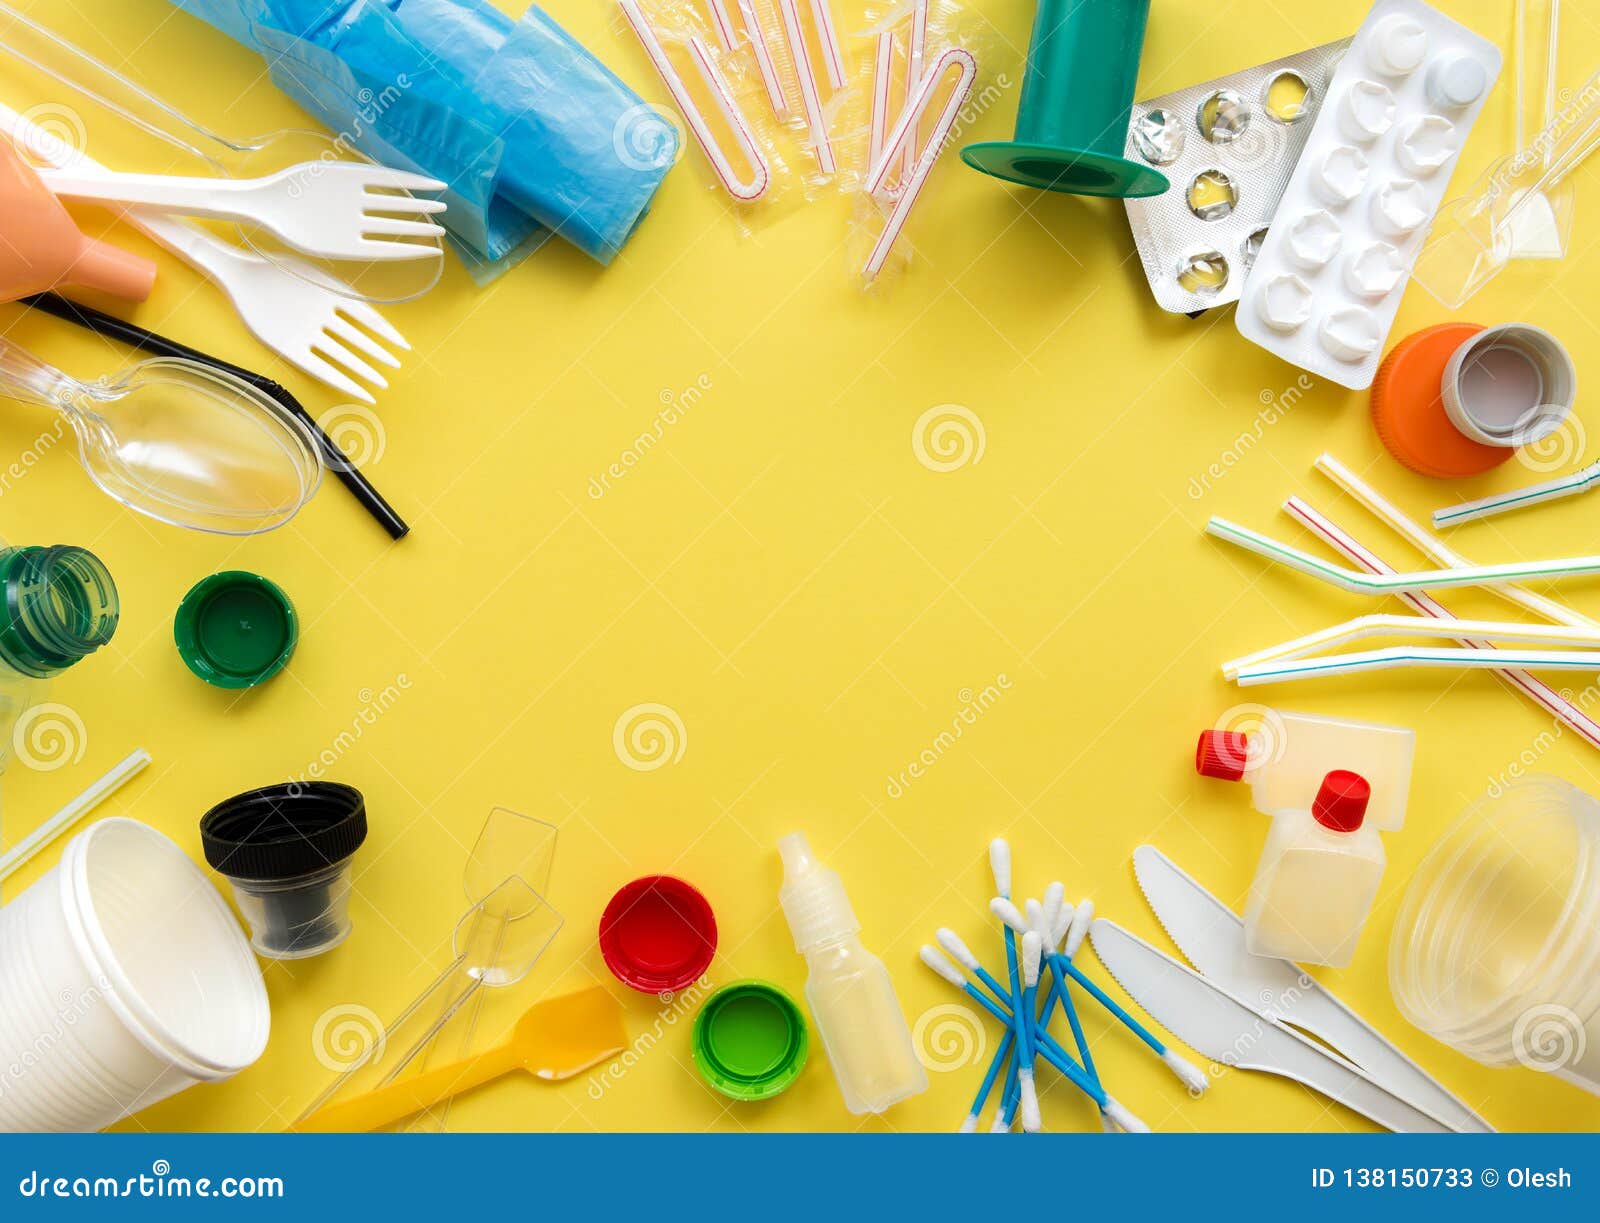 white single-use plastic and other plastic items on a yellow background